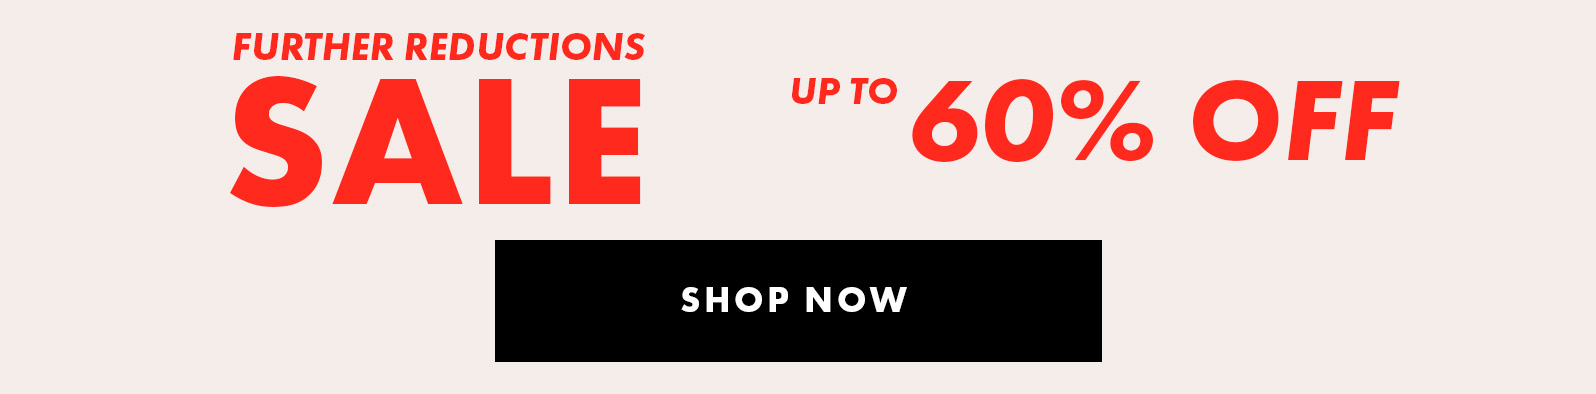 Sale up to 60% off